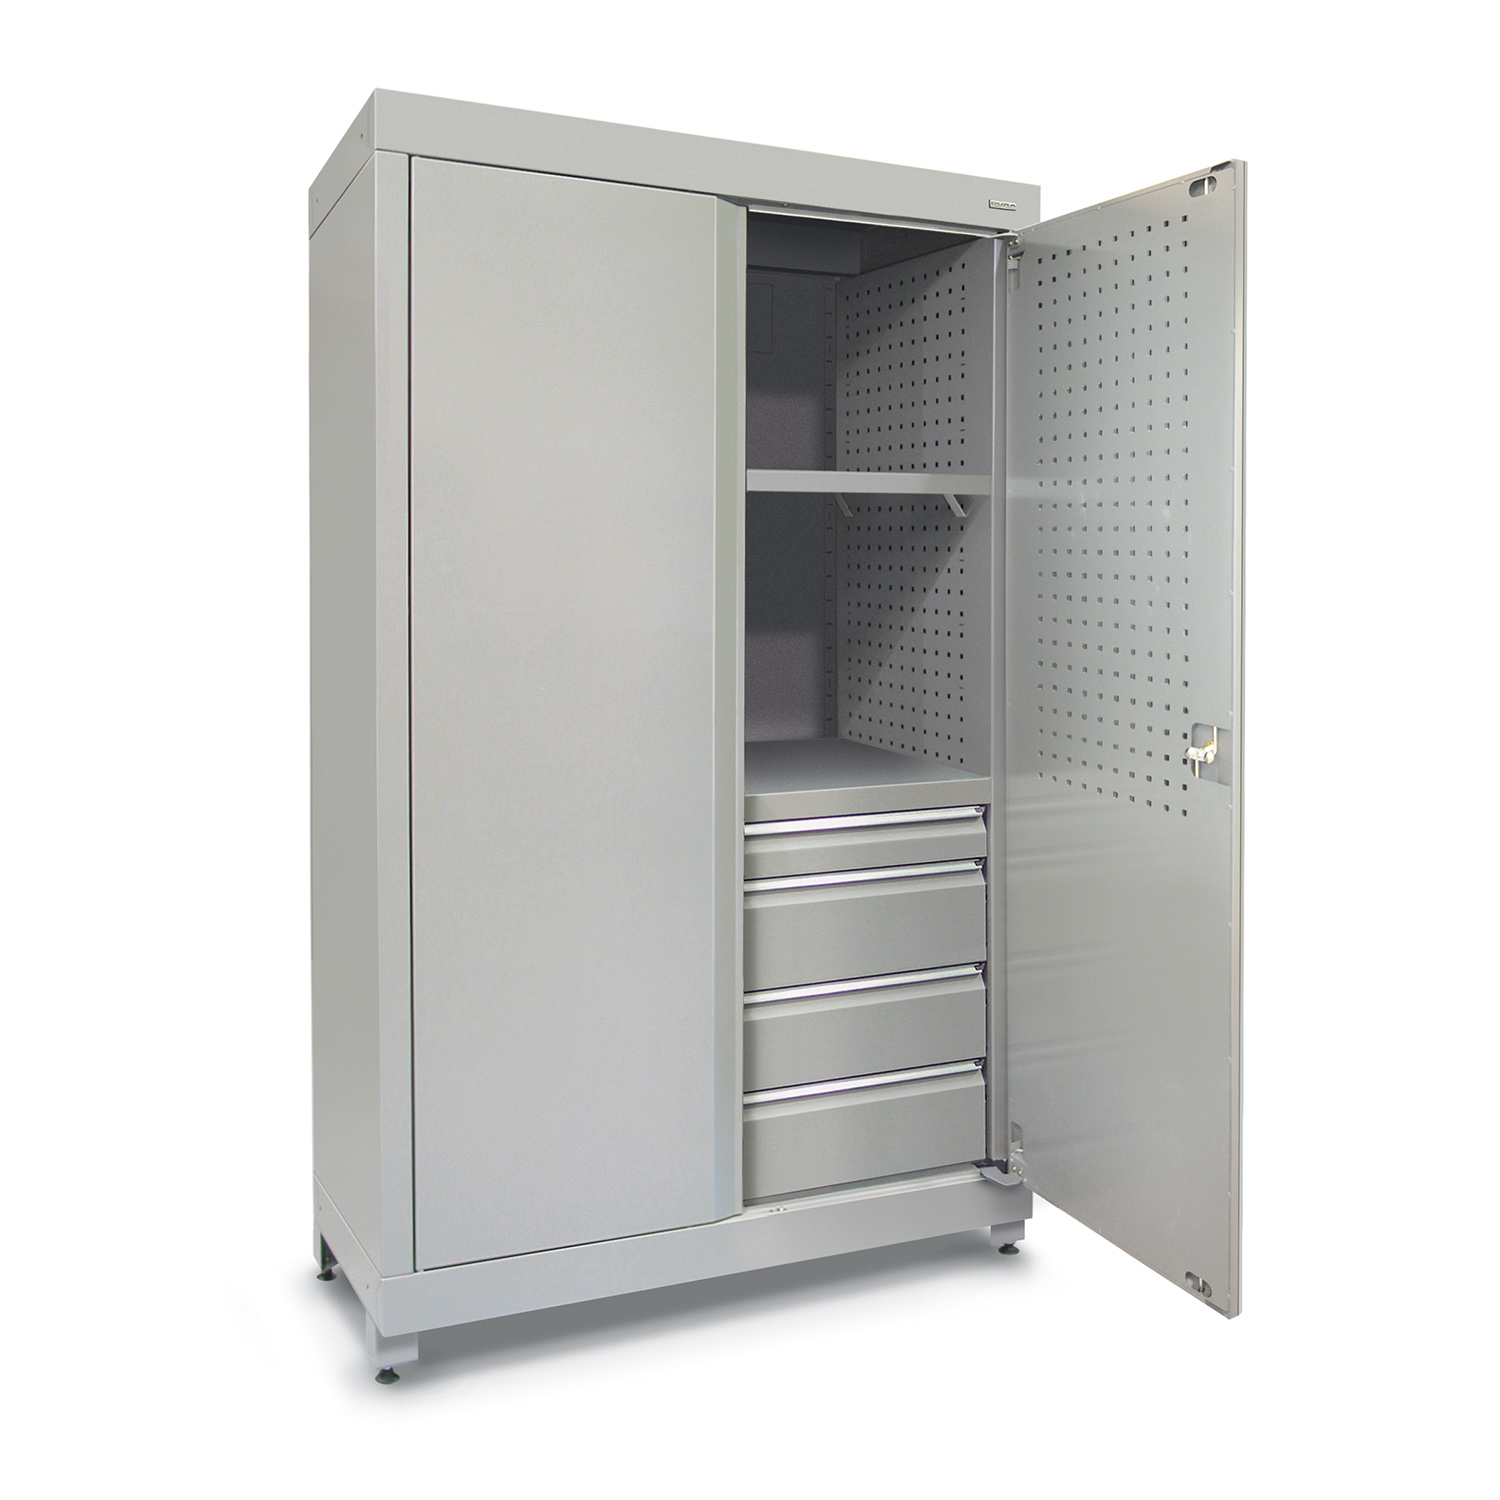 1200mm Heavy-duty shelving unit with 4 drawers